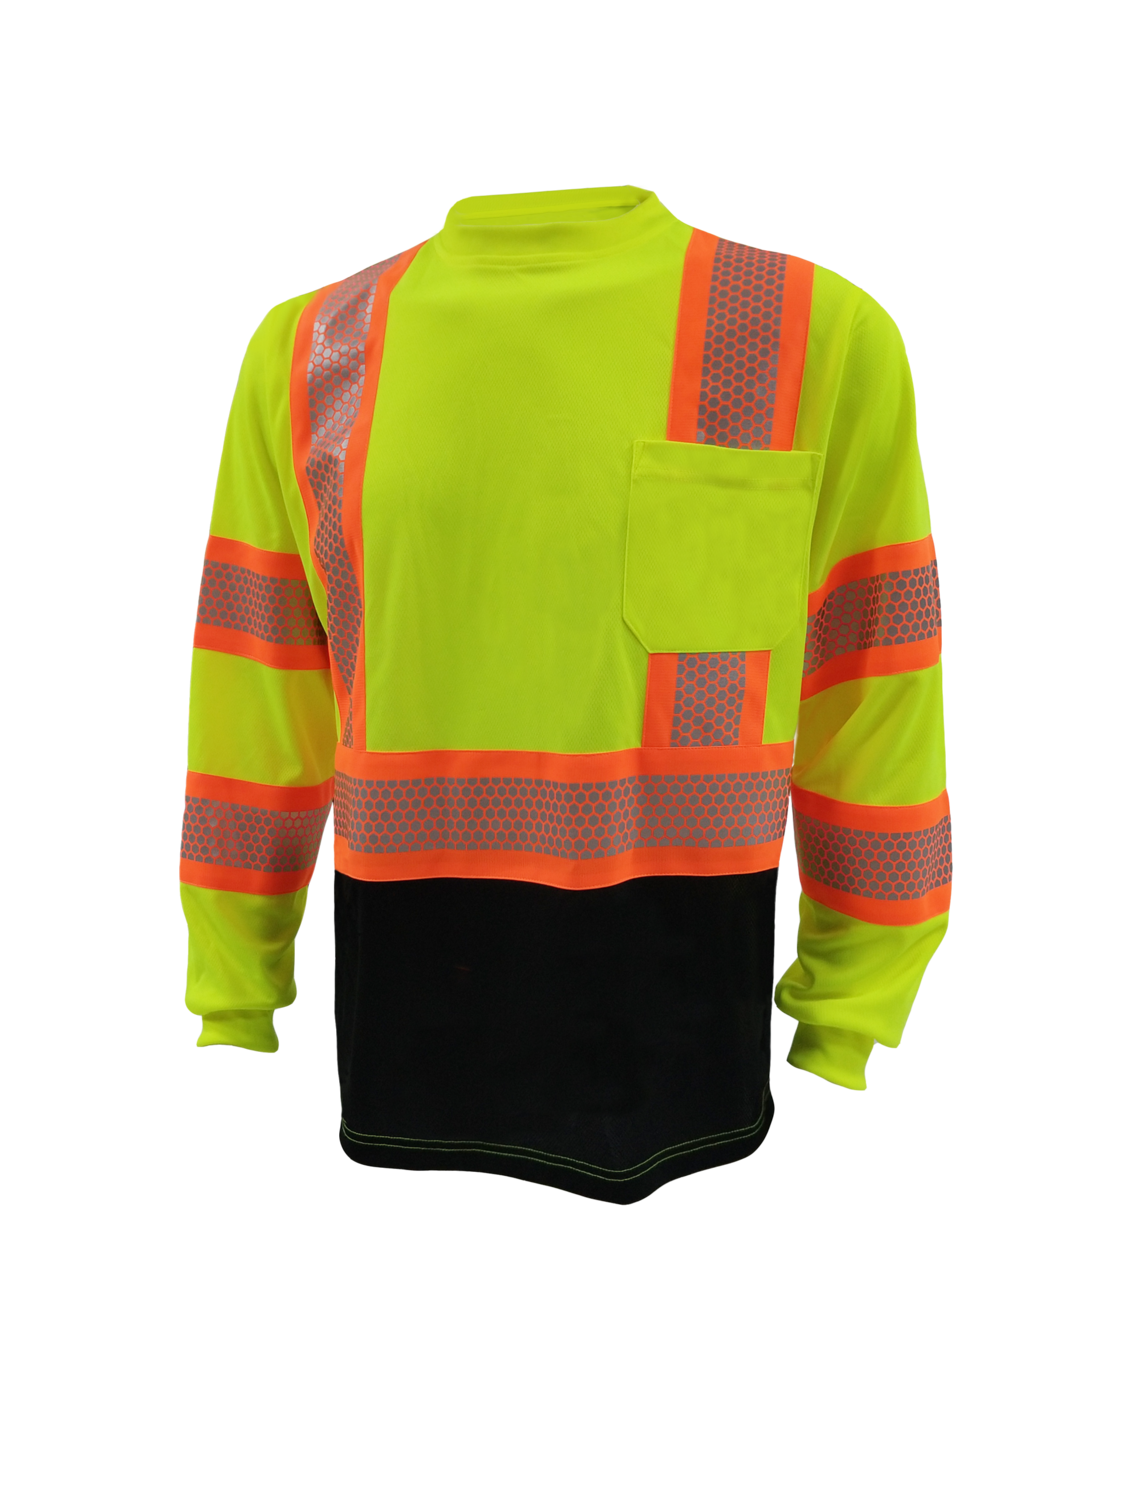 ANSI Class 3 Hi Vis Long Sleeve T-Shirt With Pocket , Honeycomb Reflective Tape And Black Bottom